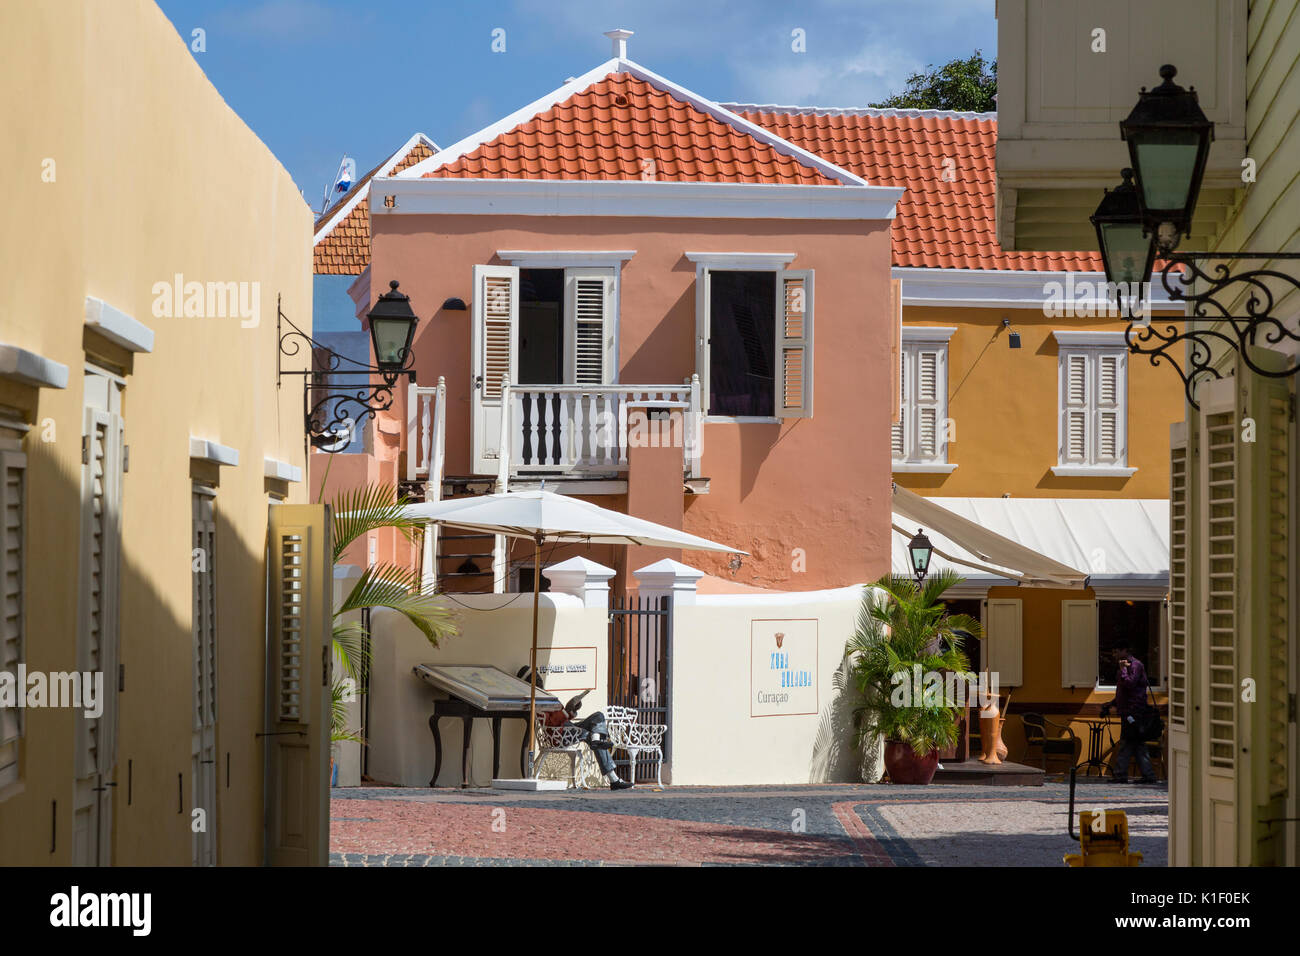 Willemstad, Curacao, Lesser Antilles.  A House in the Kura Hulanda Historic Area. Stock Photo